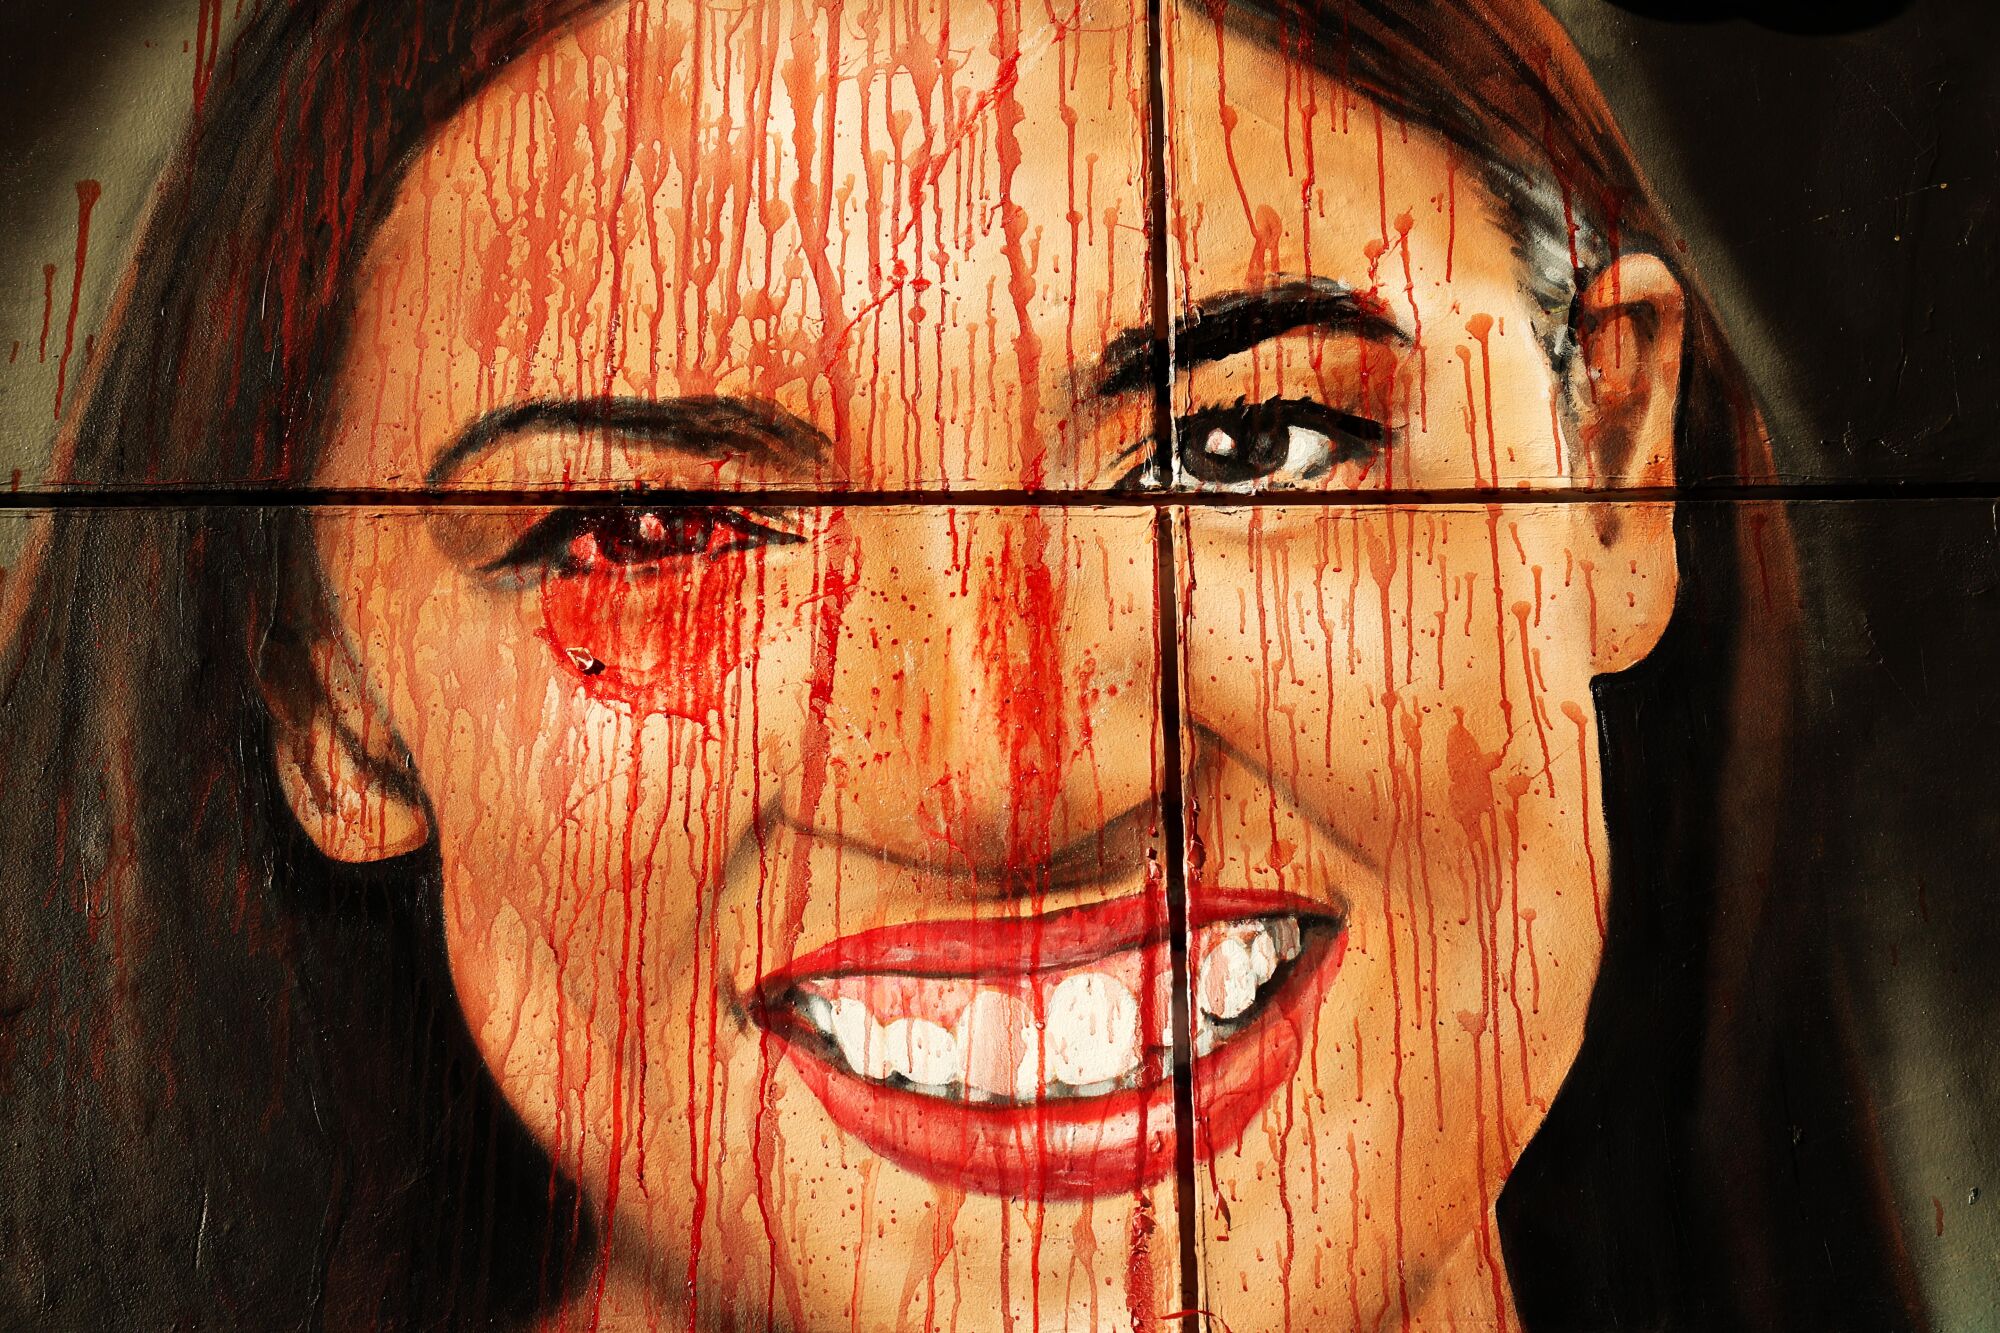 A mural of Alexandra Ocasio-Cortez with red paint splattered on it